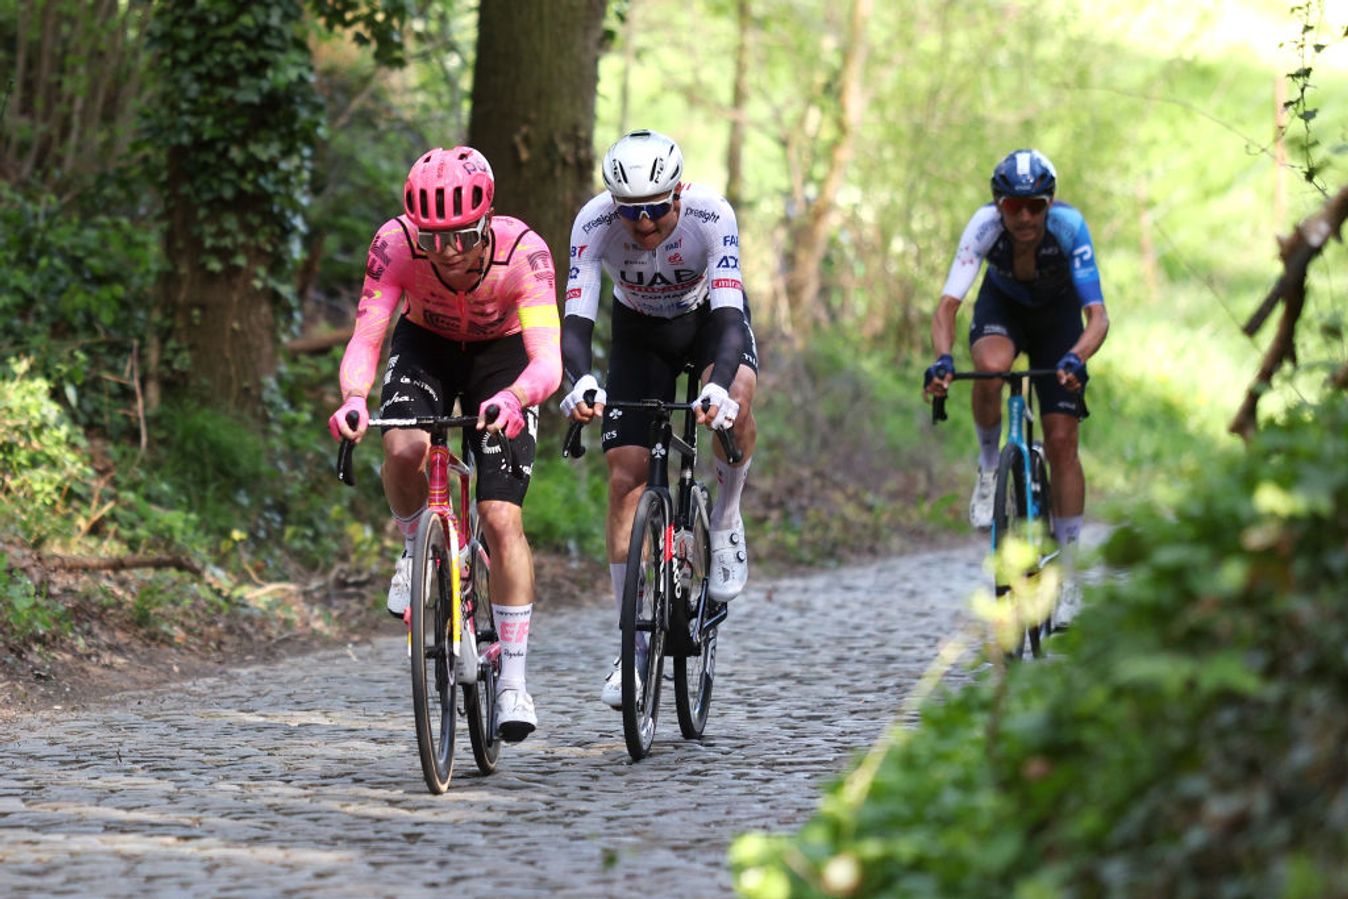 Van den Berg forces the issue on the final ascent of Moskesstraat